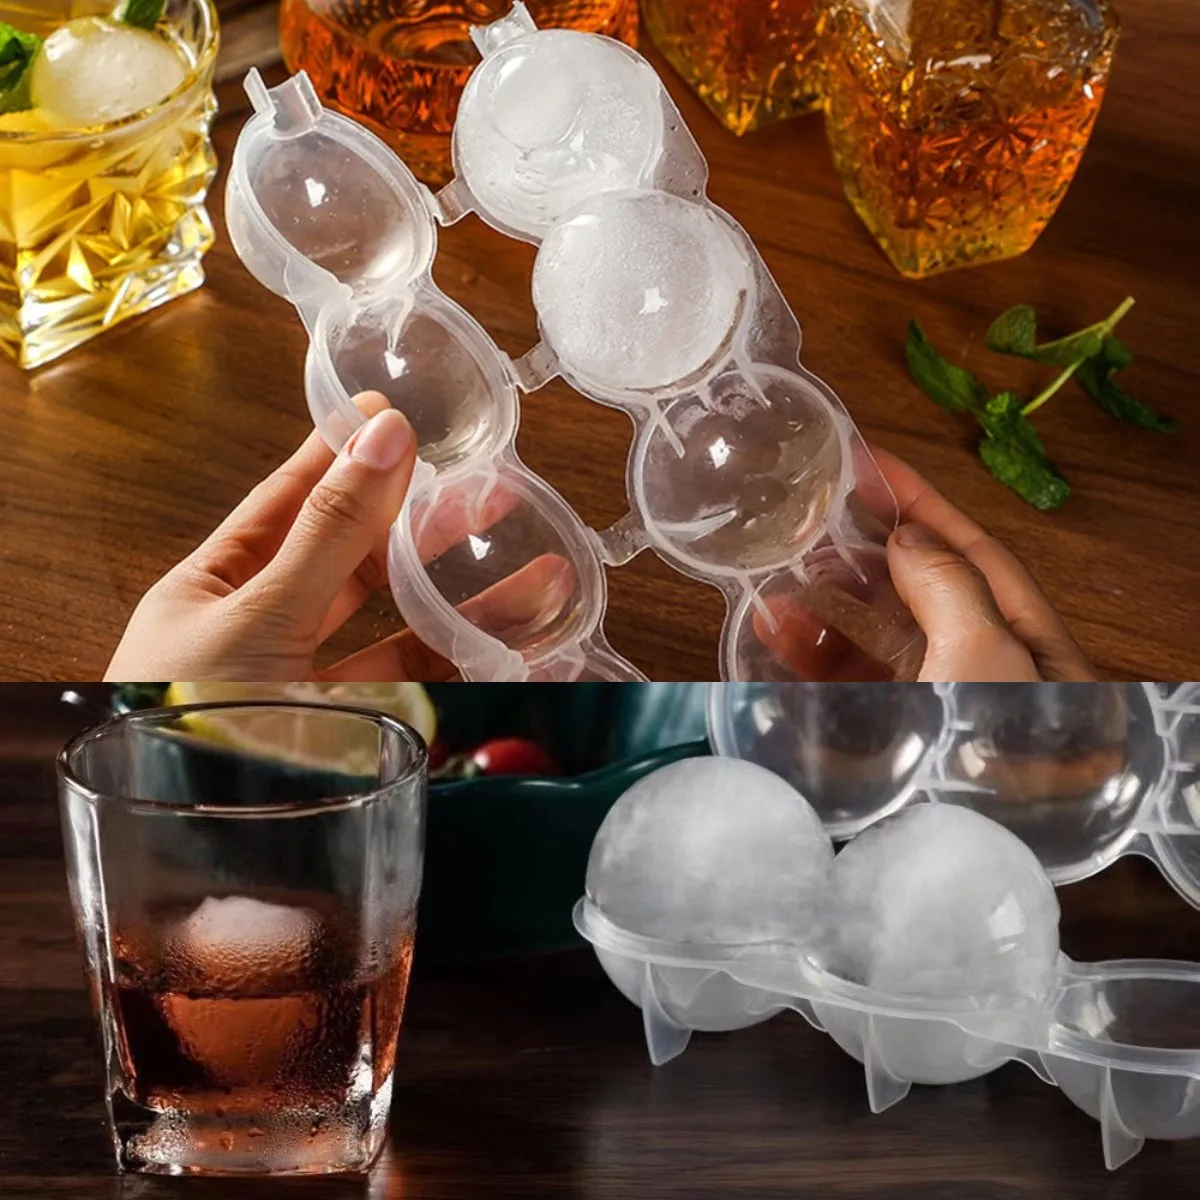 2 Packs Ice Cube Tray Plastic Ice Ball Maker Mold for Freezer 66 Pcs  Reusable Small Ice Ball Maker Circle Ice Making Tray Mini Round Ice Cube  Maker